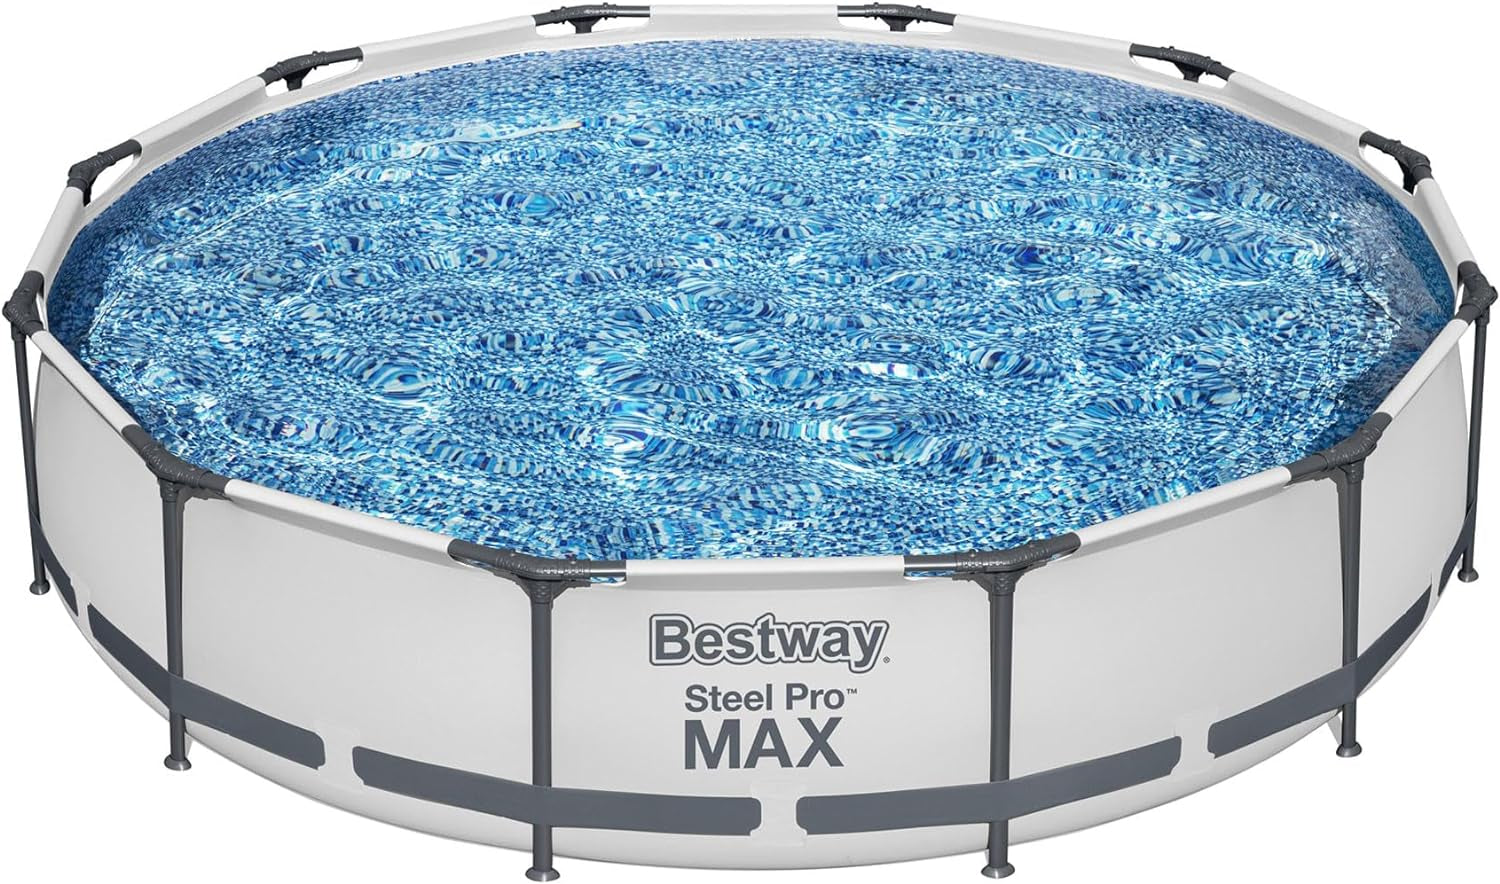 Steel Pro MAX above Ground Swimming Pool (12' X 30") | round Outdoor Backyard Family Pool | Includes 530 GPH Pump and Repair Patch Kit